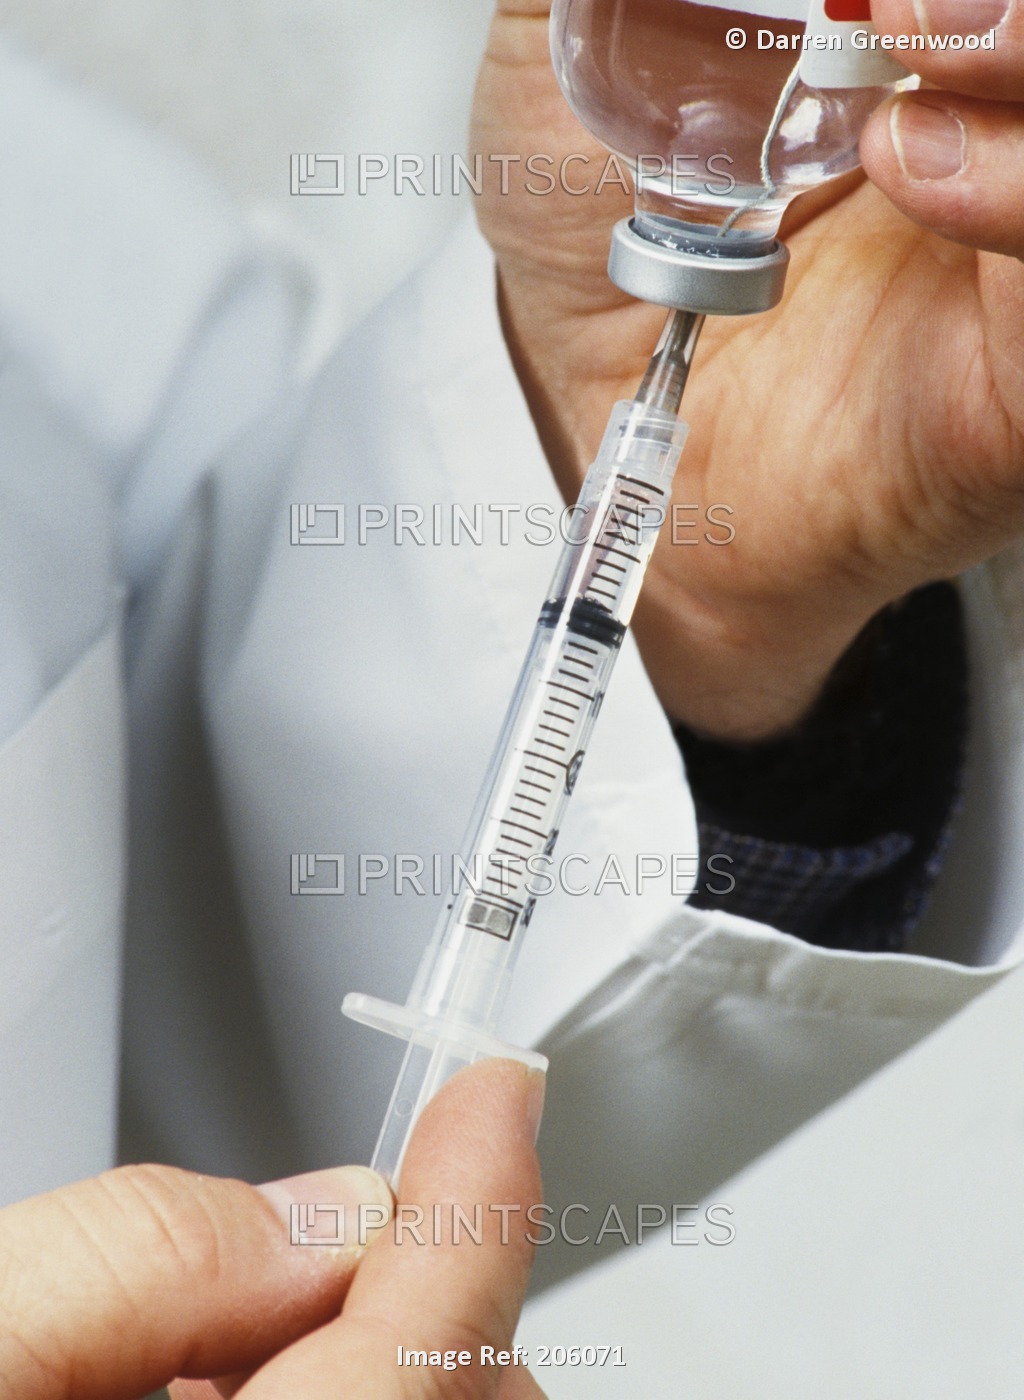 Medical Personnel Drawing Injection From Vial